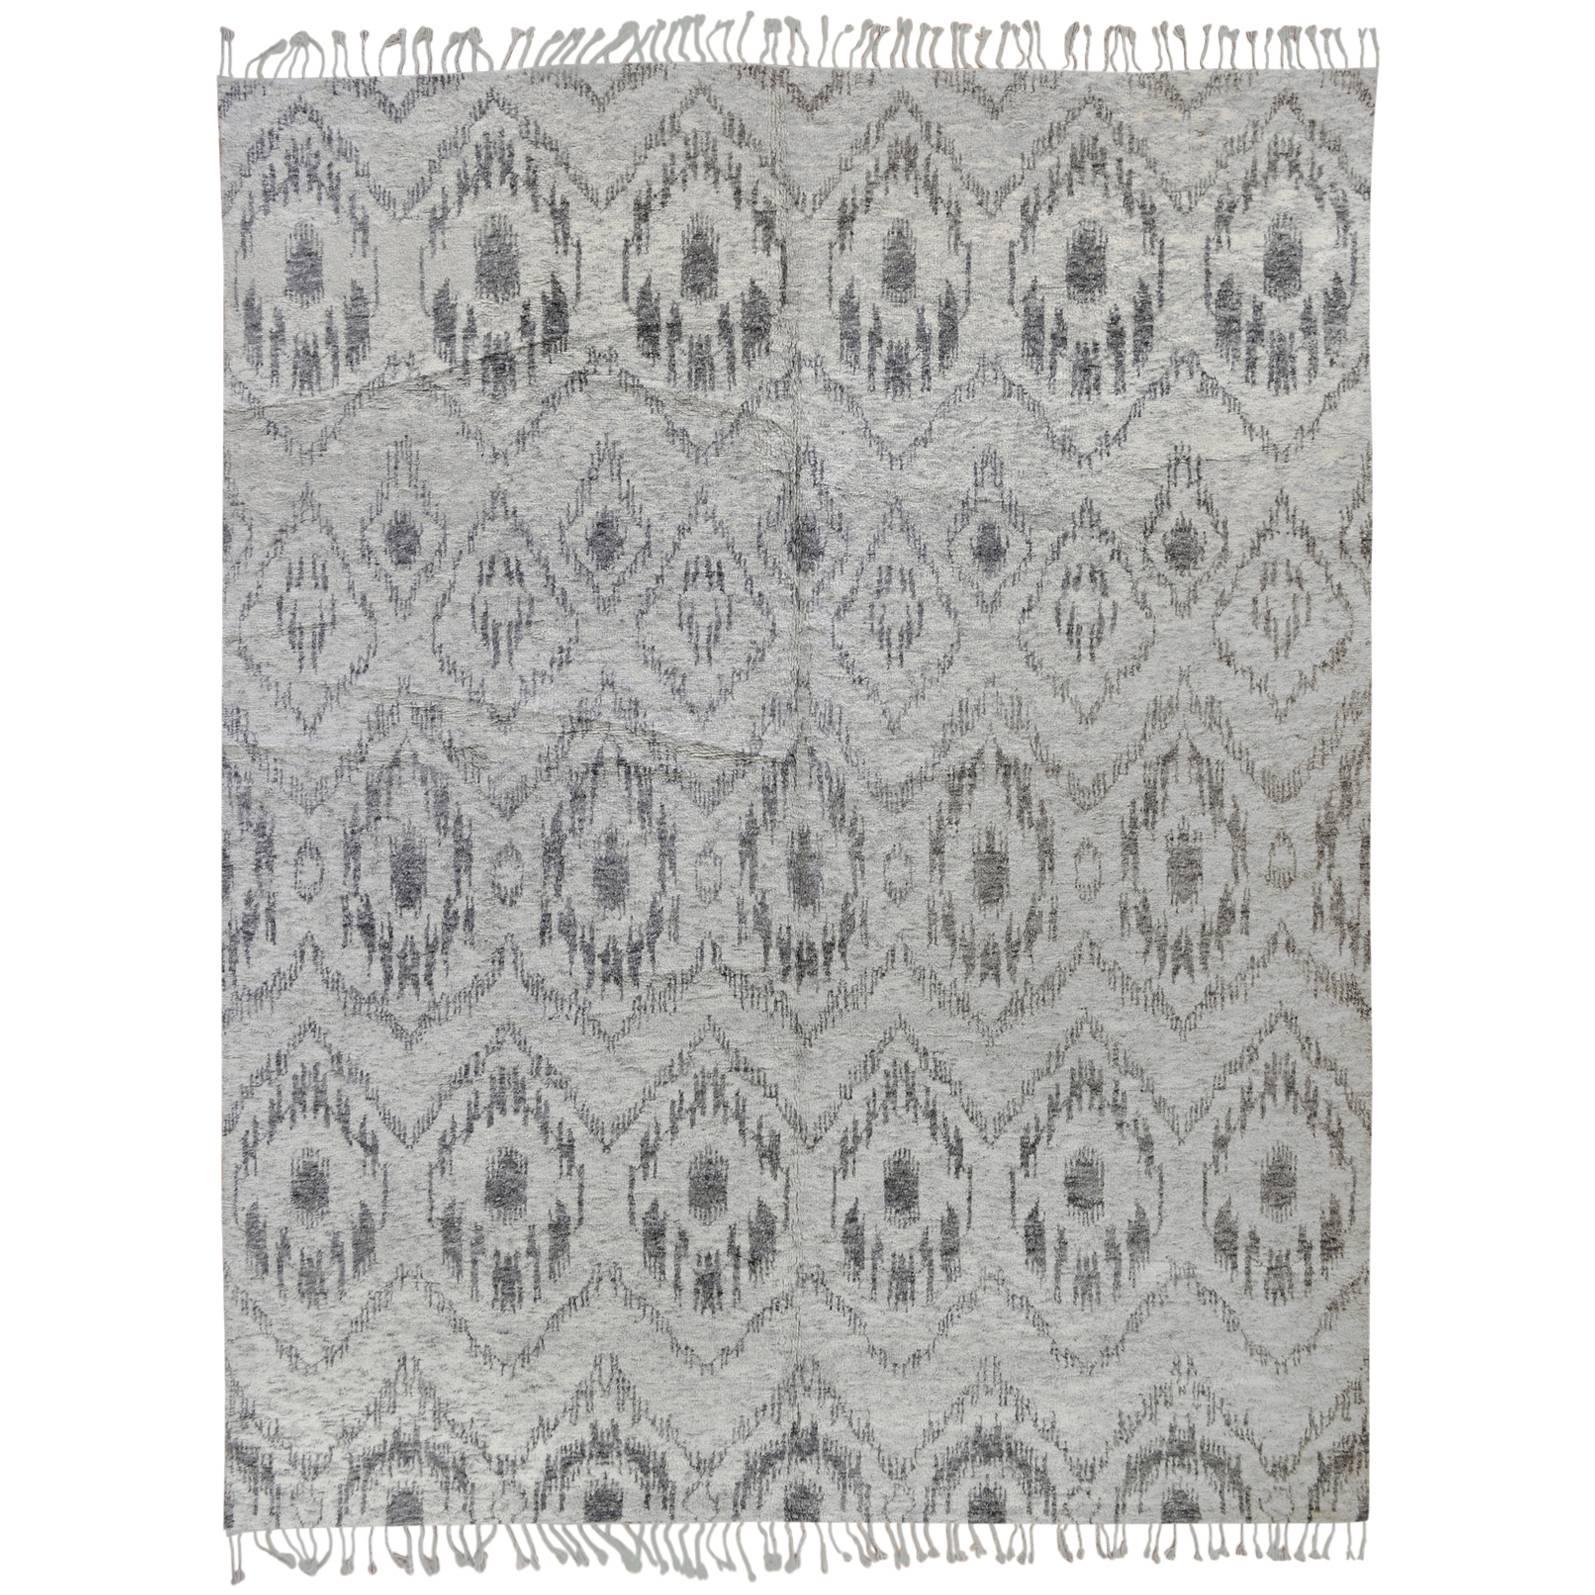 Moroccan Inspired Area Rug For Sale